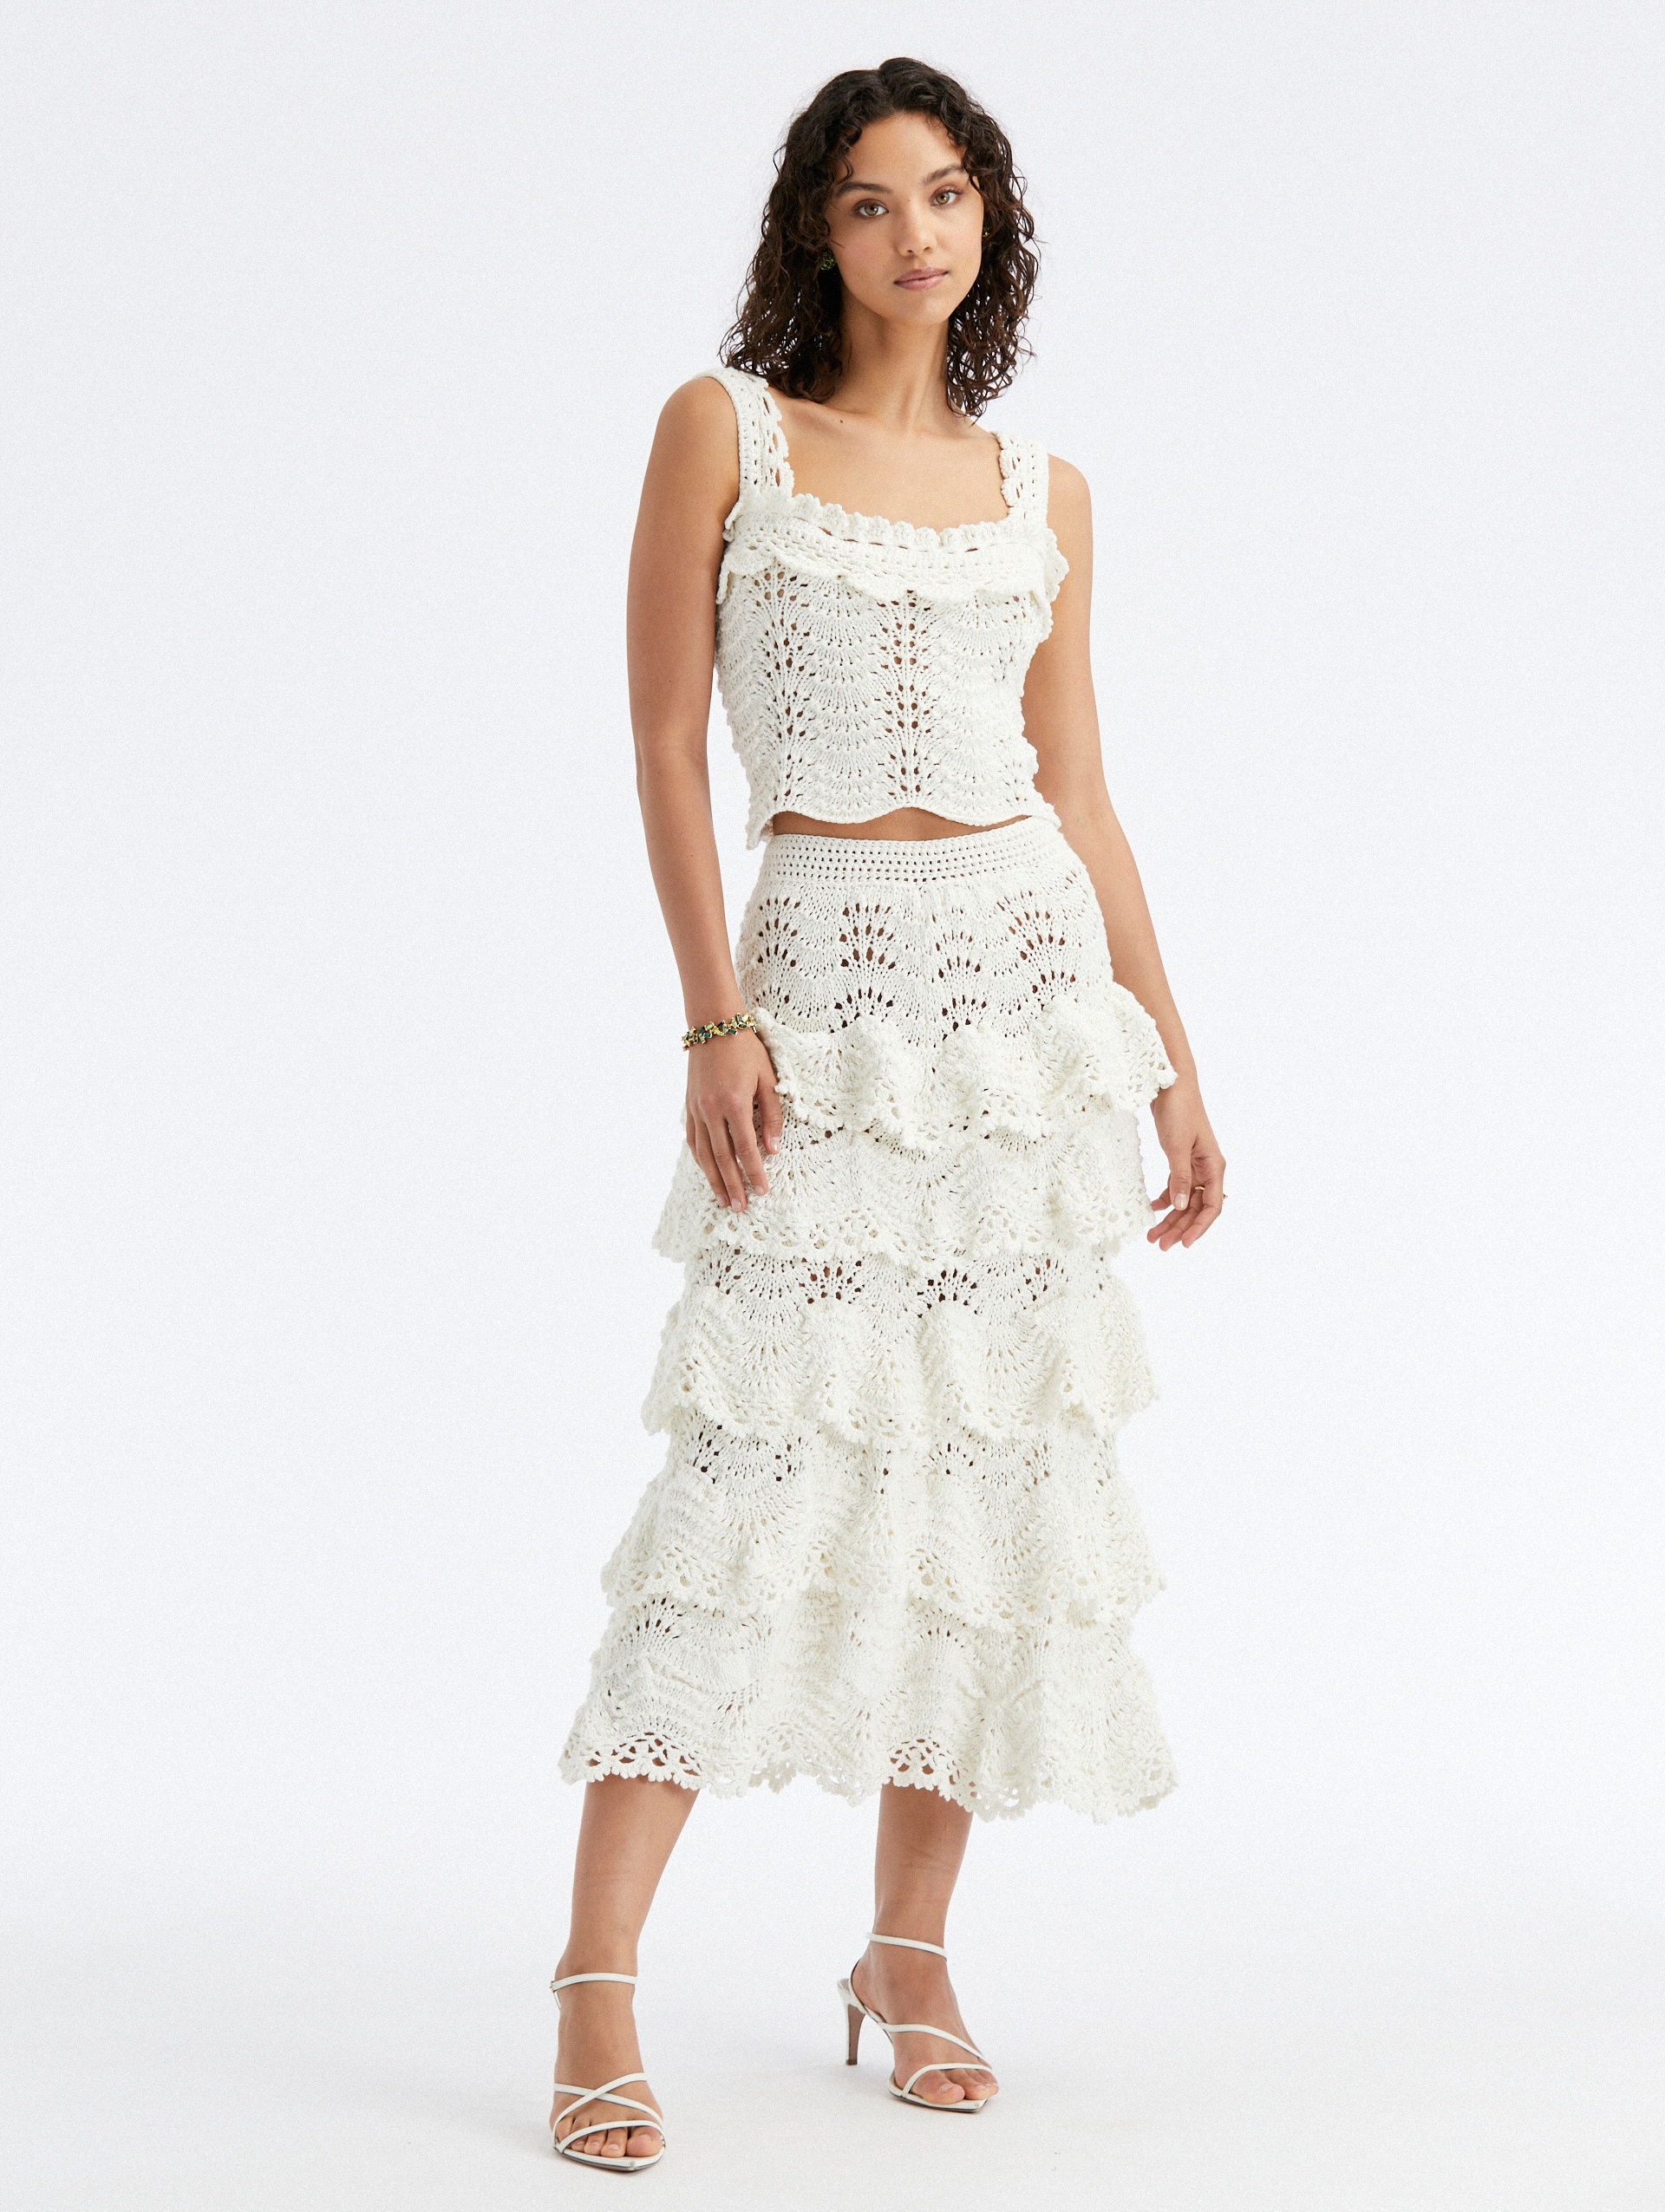 HAND CROCHETED SCALLOP TIERED SKIRT - 1